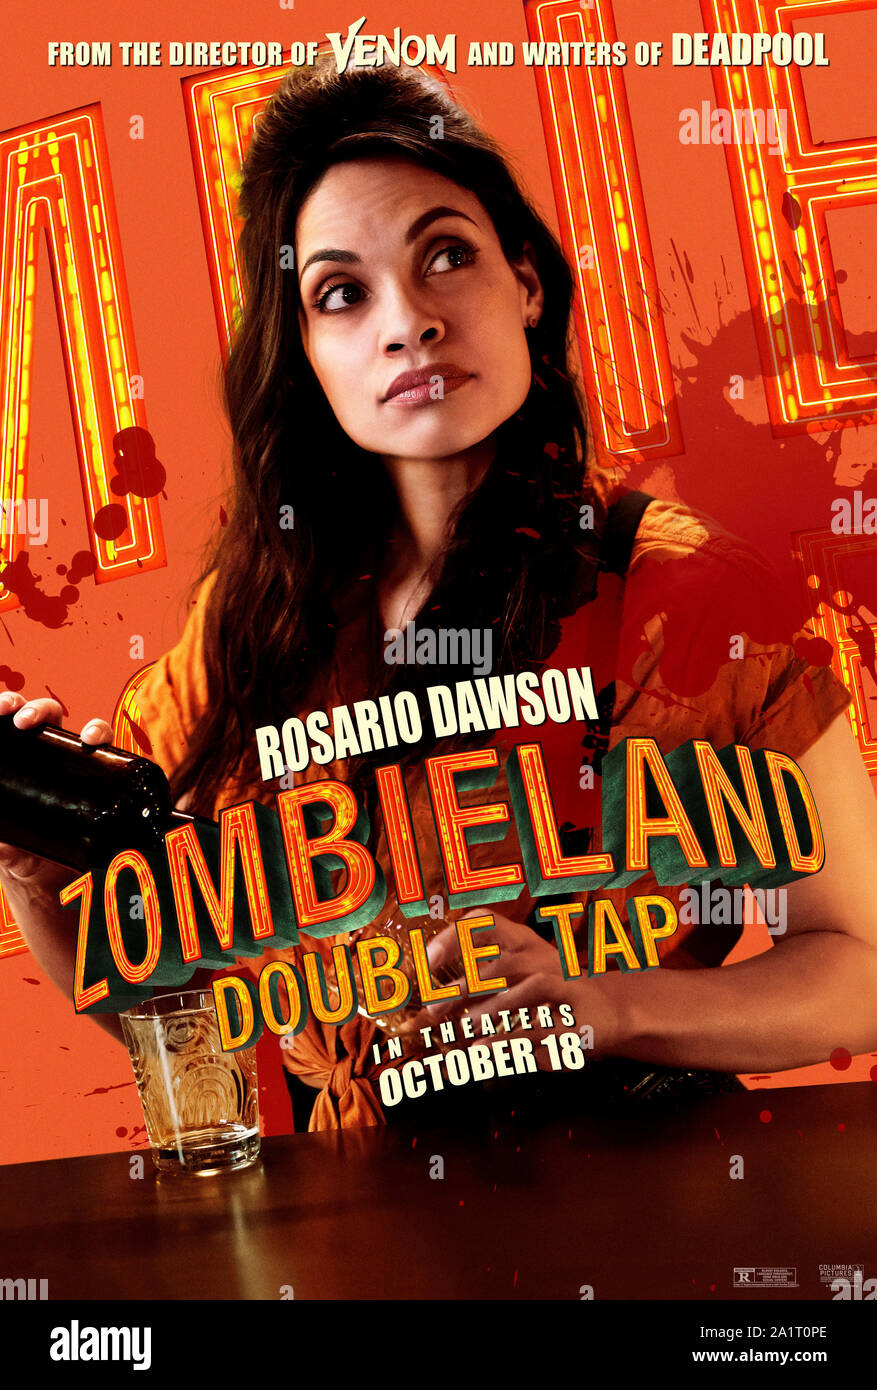 RELEASE DATE: October 18, 2019 TITLE: Zombieland 2: Double Tap STUDIO: Colombia Pictures DIRECTOR: Ruben Fleischer PLOT: Columbus, Tallahasse, Wichita, and Little Rock move to the American heartland as they face off against evolved zombies, fellow survivors, and the growing pains of the snarky makeshift family. STARRING: ROSARIO DAWSON as Nevada. (Credit Image: © Colombia Pictures/Entertainment Pictures) Stock Photo